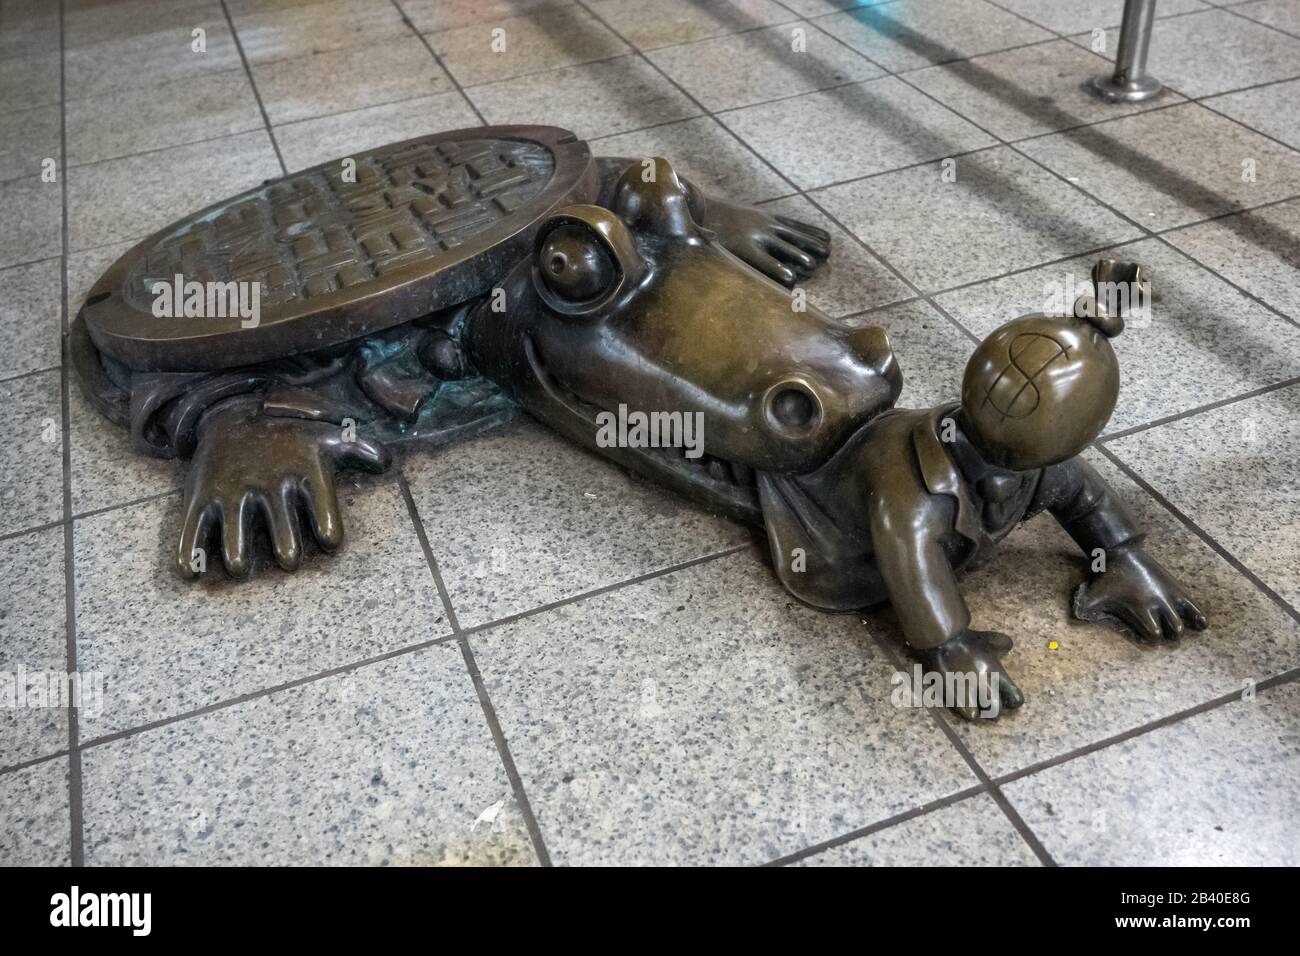 New York, USA,  5 March 2019.  A bronze sculpture referring to the urban legend of  an alligator crawling out from under a sewer cover, part of a seri Stock Photo